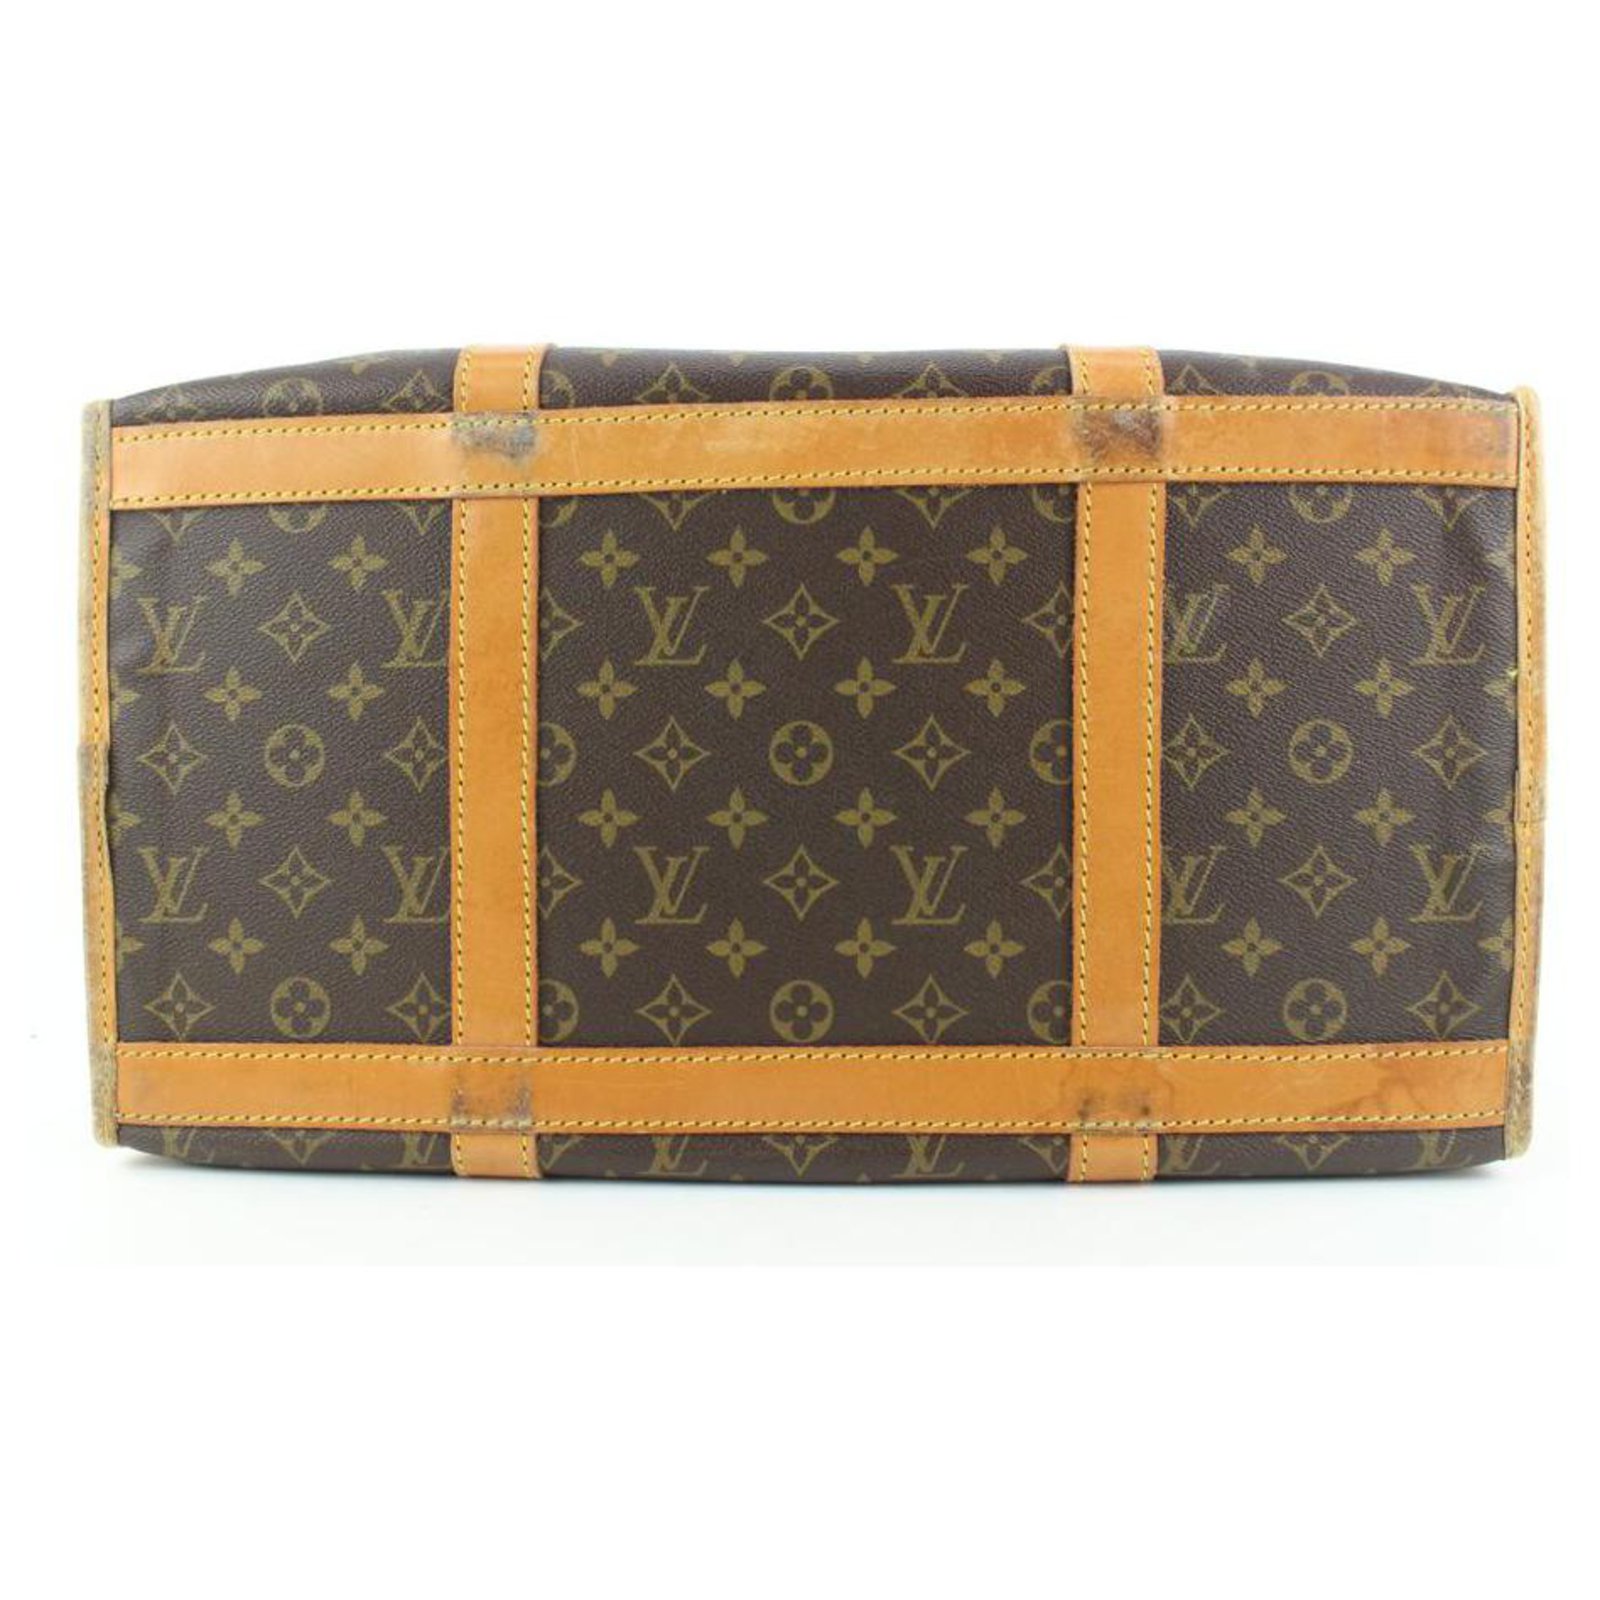 Sold at Auction: Louis Vuitton Dog Carrier 50